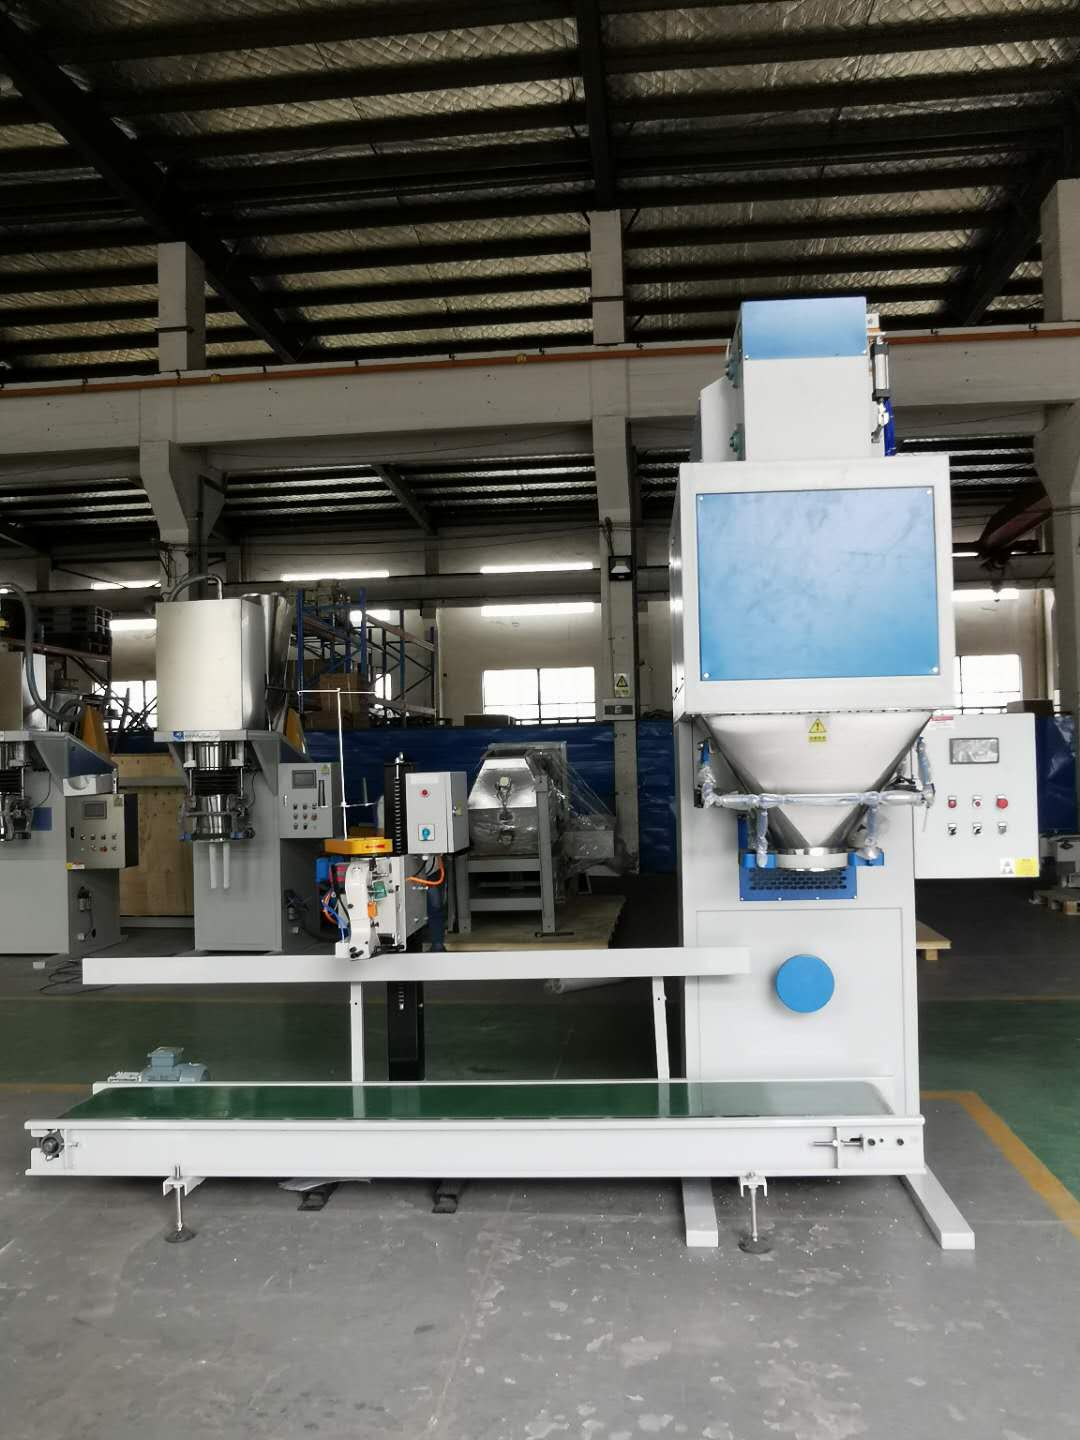 full automatic fuel pellets packaging machine 无锡航一机械有限公司WUXI HY MACHINERY CO., LTD full automatic bagging palletizing and wrapping system Fully Automatic Packing System Palletizing Line